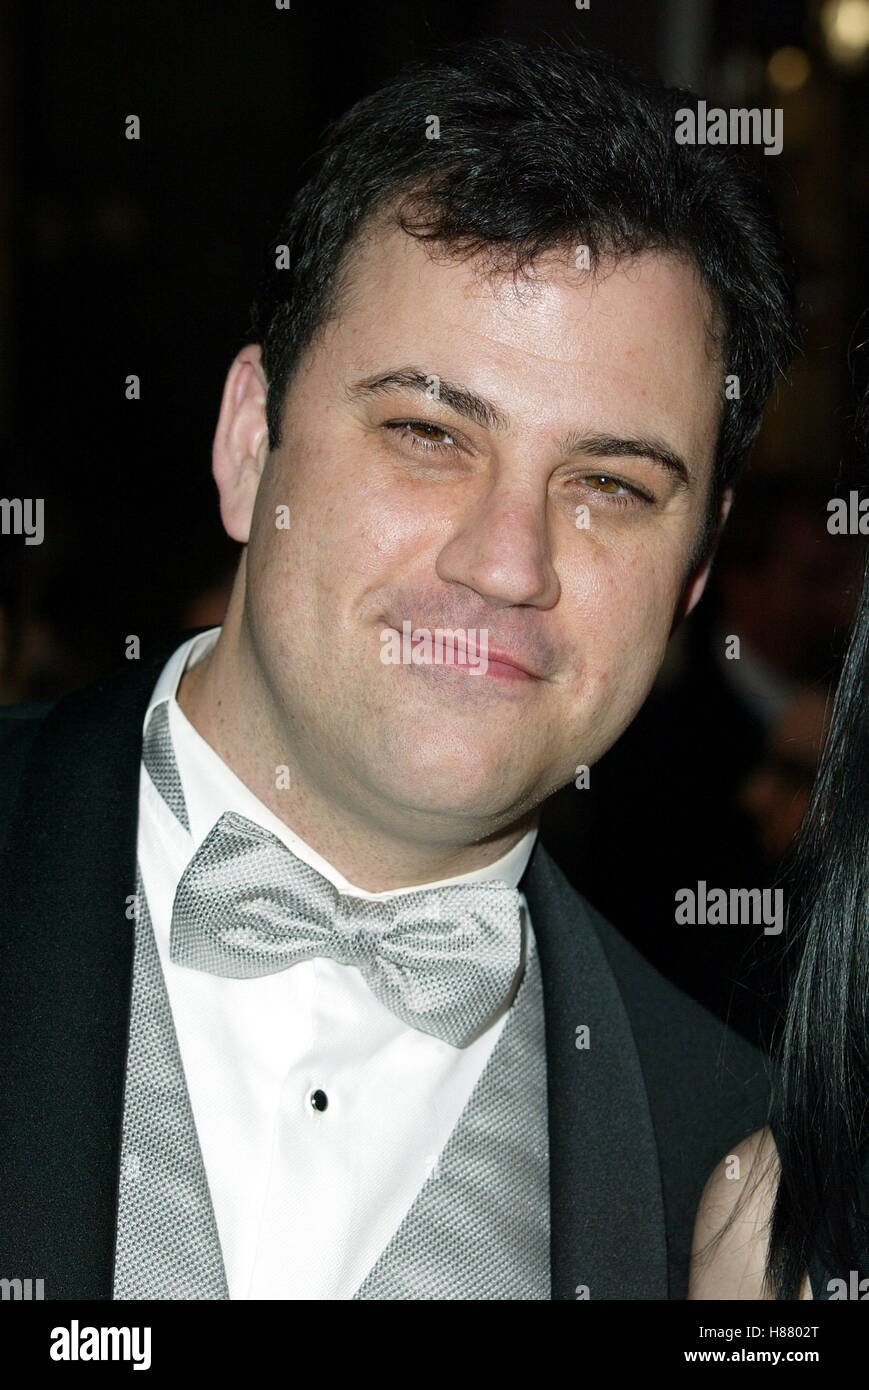 JIMMY KIMMEL ABC TV 50TH ANNIVERSARY PANTAGES THEATRE HOLLYWOOD LA USA 16 March 2003 Stock Photo